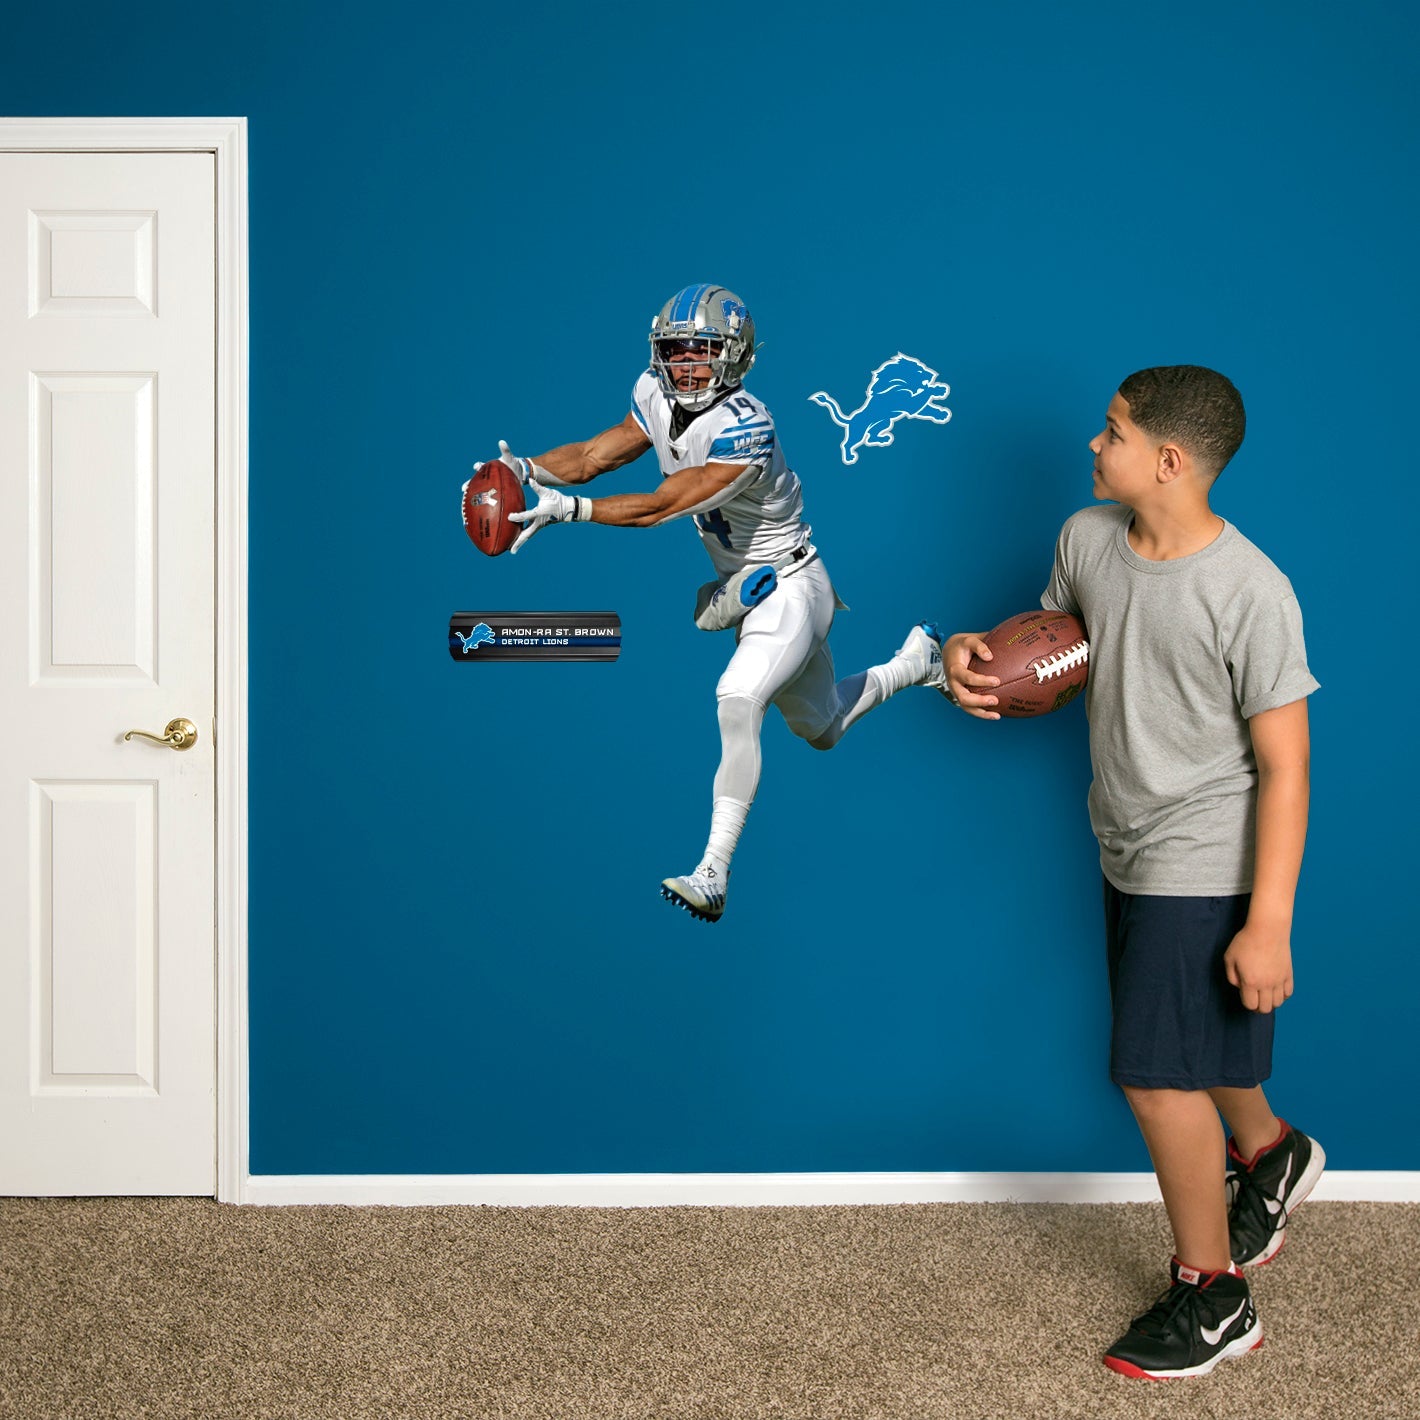 Detroit Lions: Amon-Ra St. Brown Catch - Officially Licensed NFL Removable Adhesive Decal